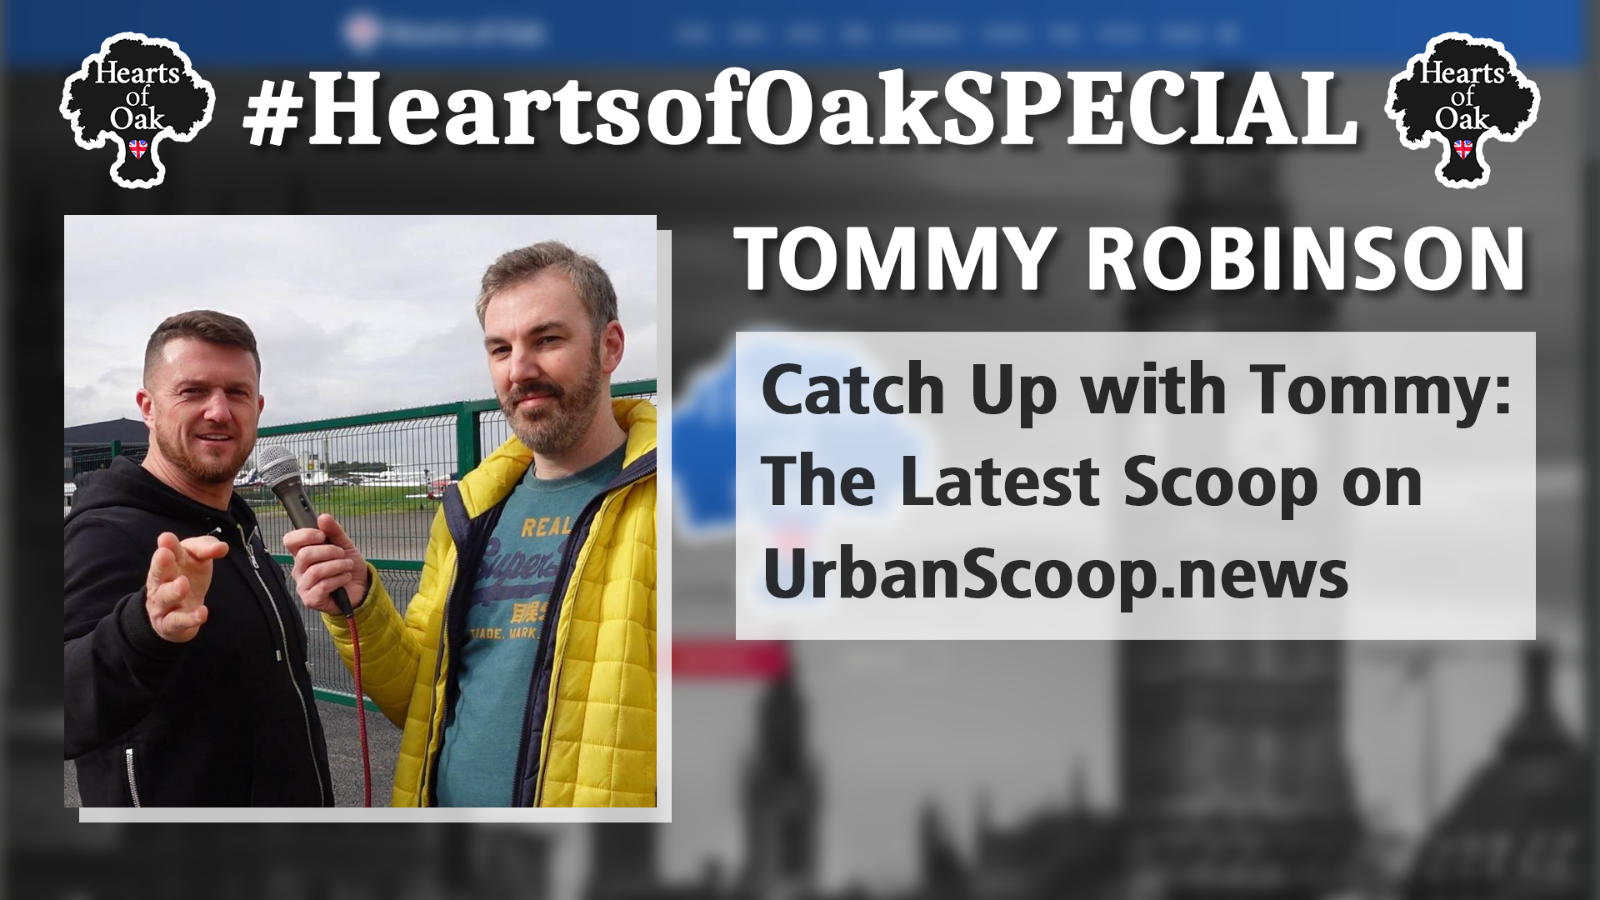 Tommy Robinson - Catch Up with Tommy: The Latest Scoop on Urban Scoop